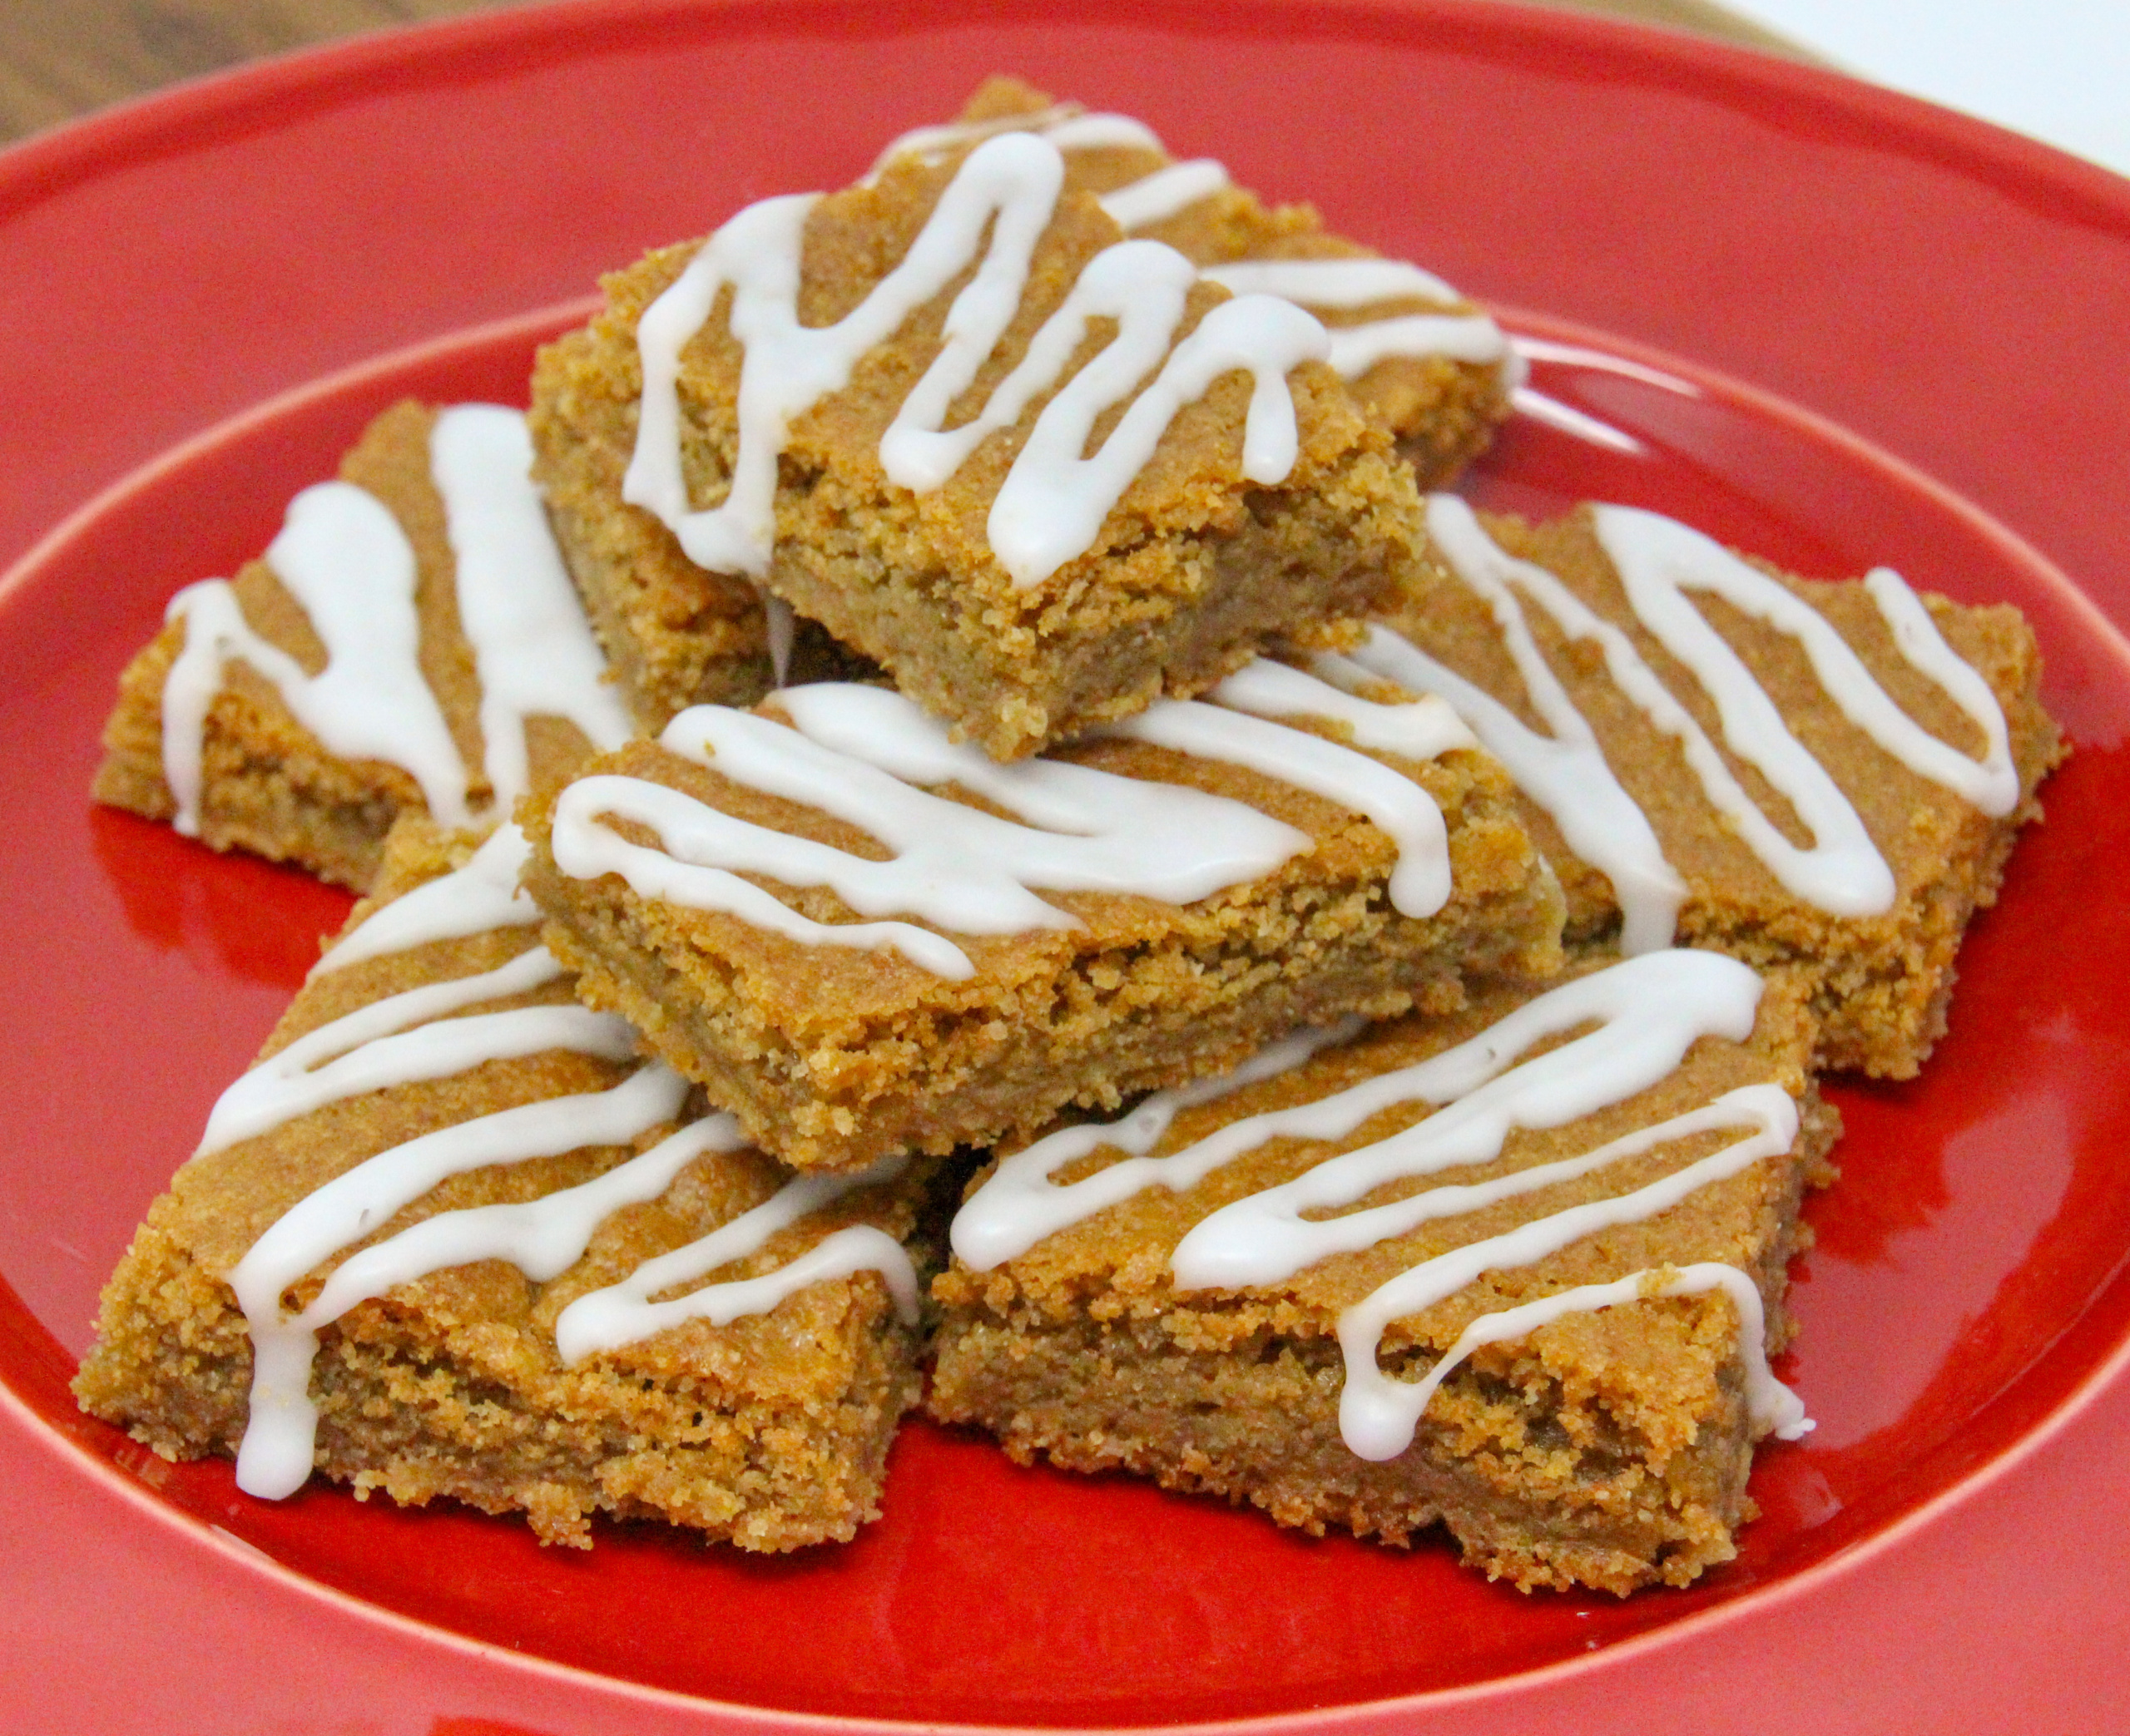 Ground Rules Blondies are naturally gluten-free and vegan. With simple staple ingredients, these mix up quickly for a sweet treat! Recipe shared with permission granted by Emmeline Duncan, author of DEATH UNFILTERED. 